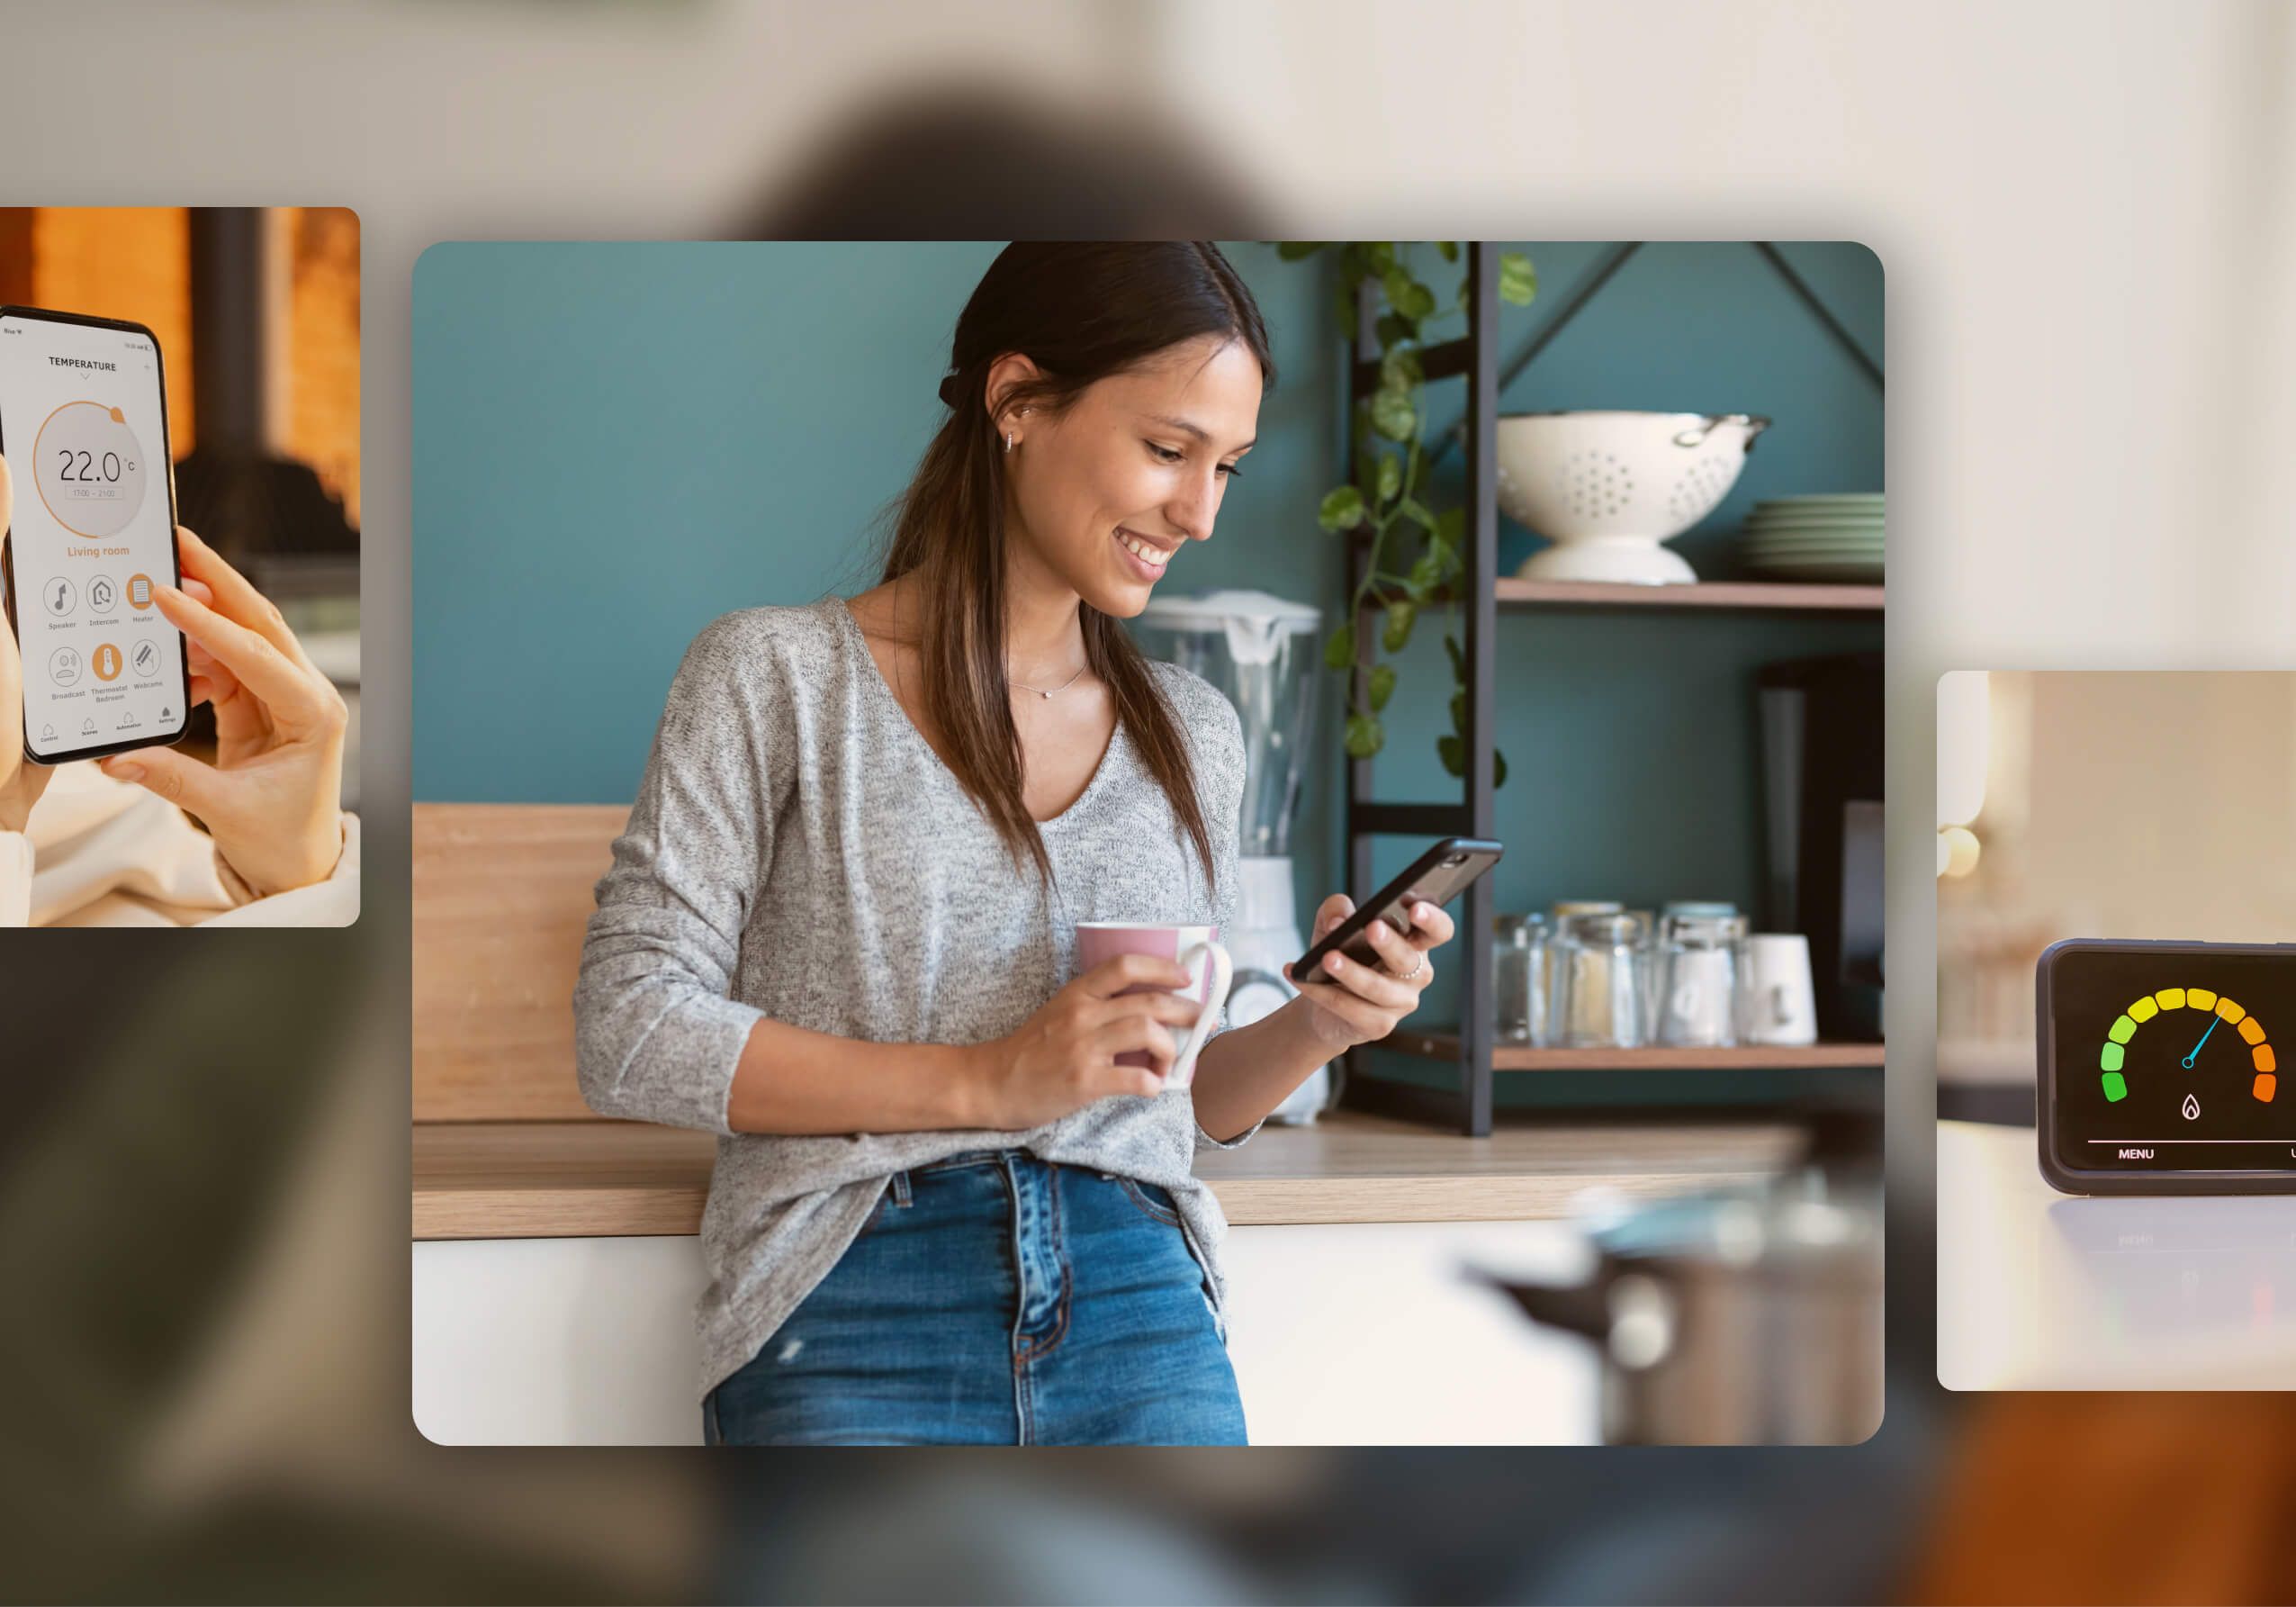 Image of a person in the kitchen looking at her phone with a Smart Meter and Heating app overlaid